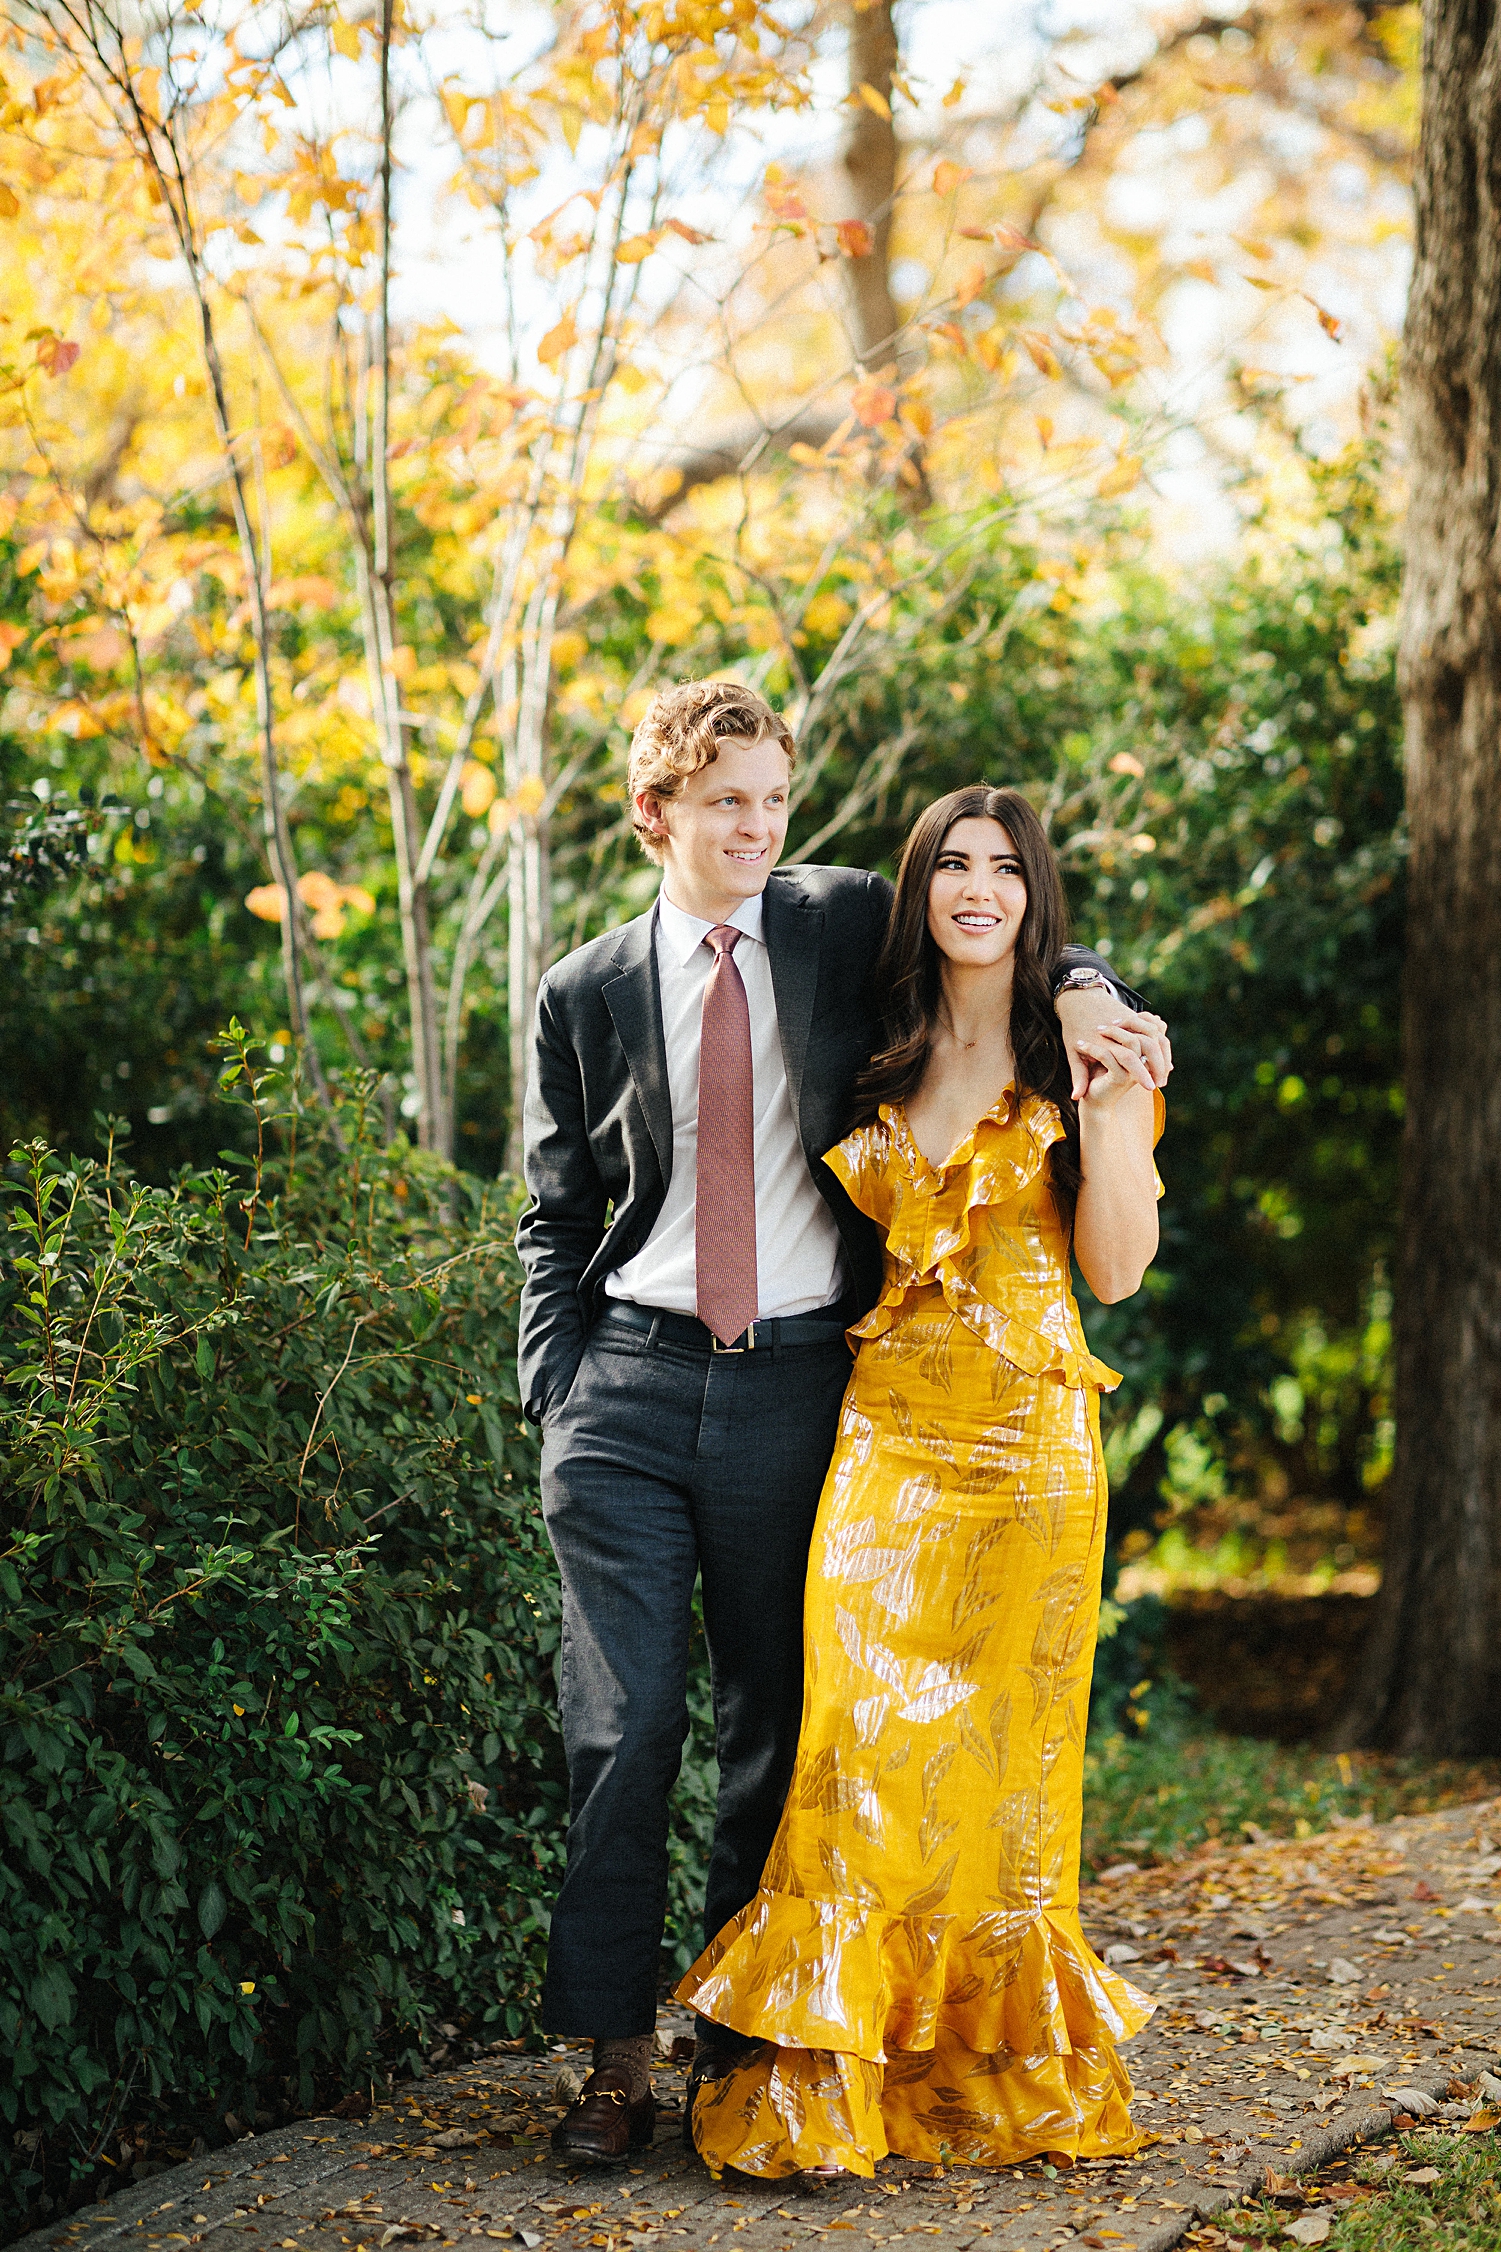 brunette girl in yellow dress walking with man in suit arm in arm